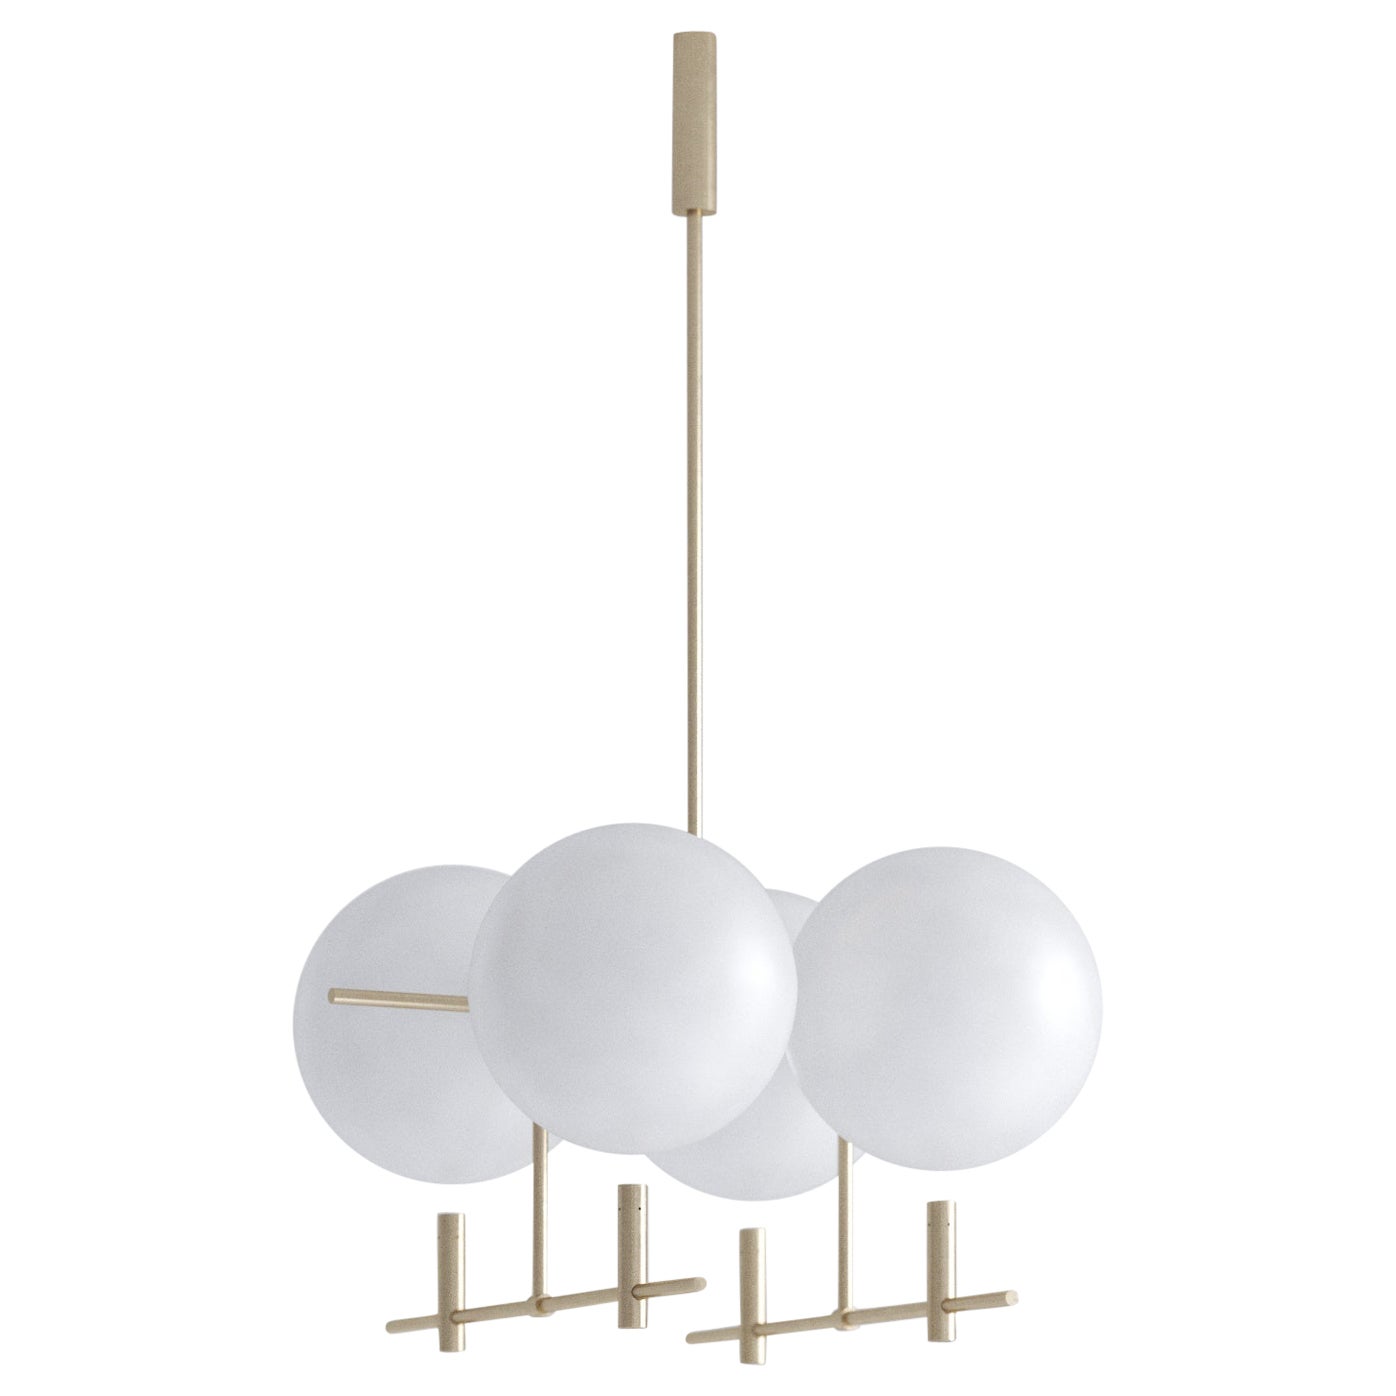 Luna Luminaire / Chandelier Horizontal II04 in Brushed Gold For Sale